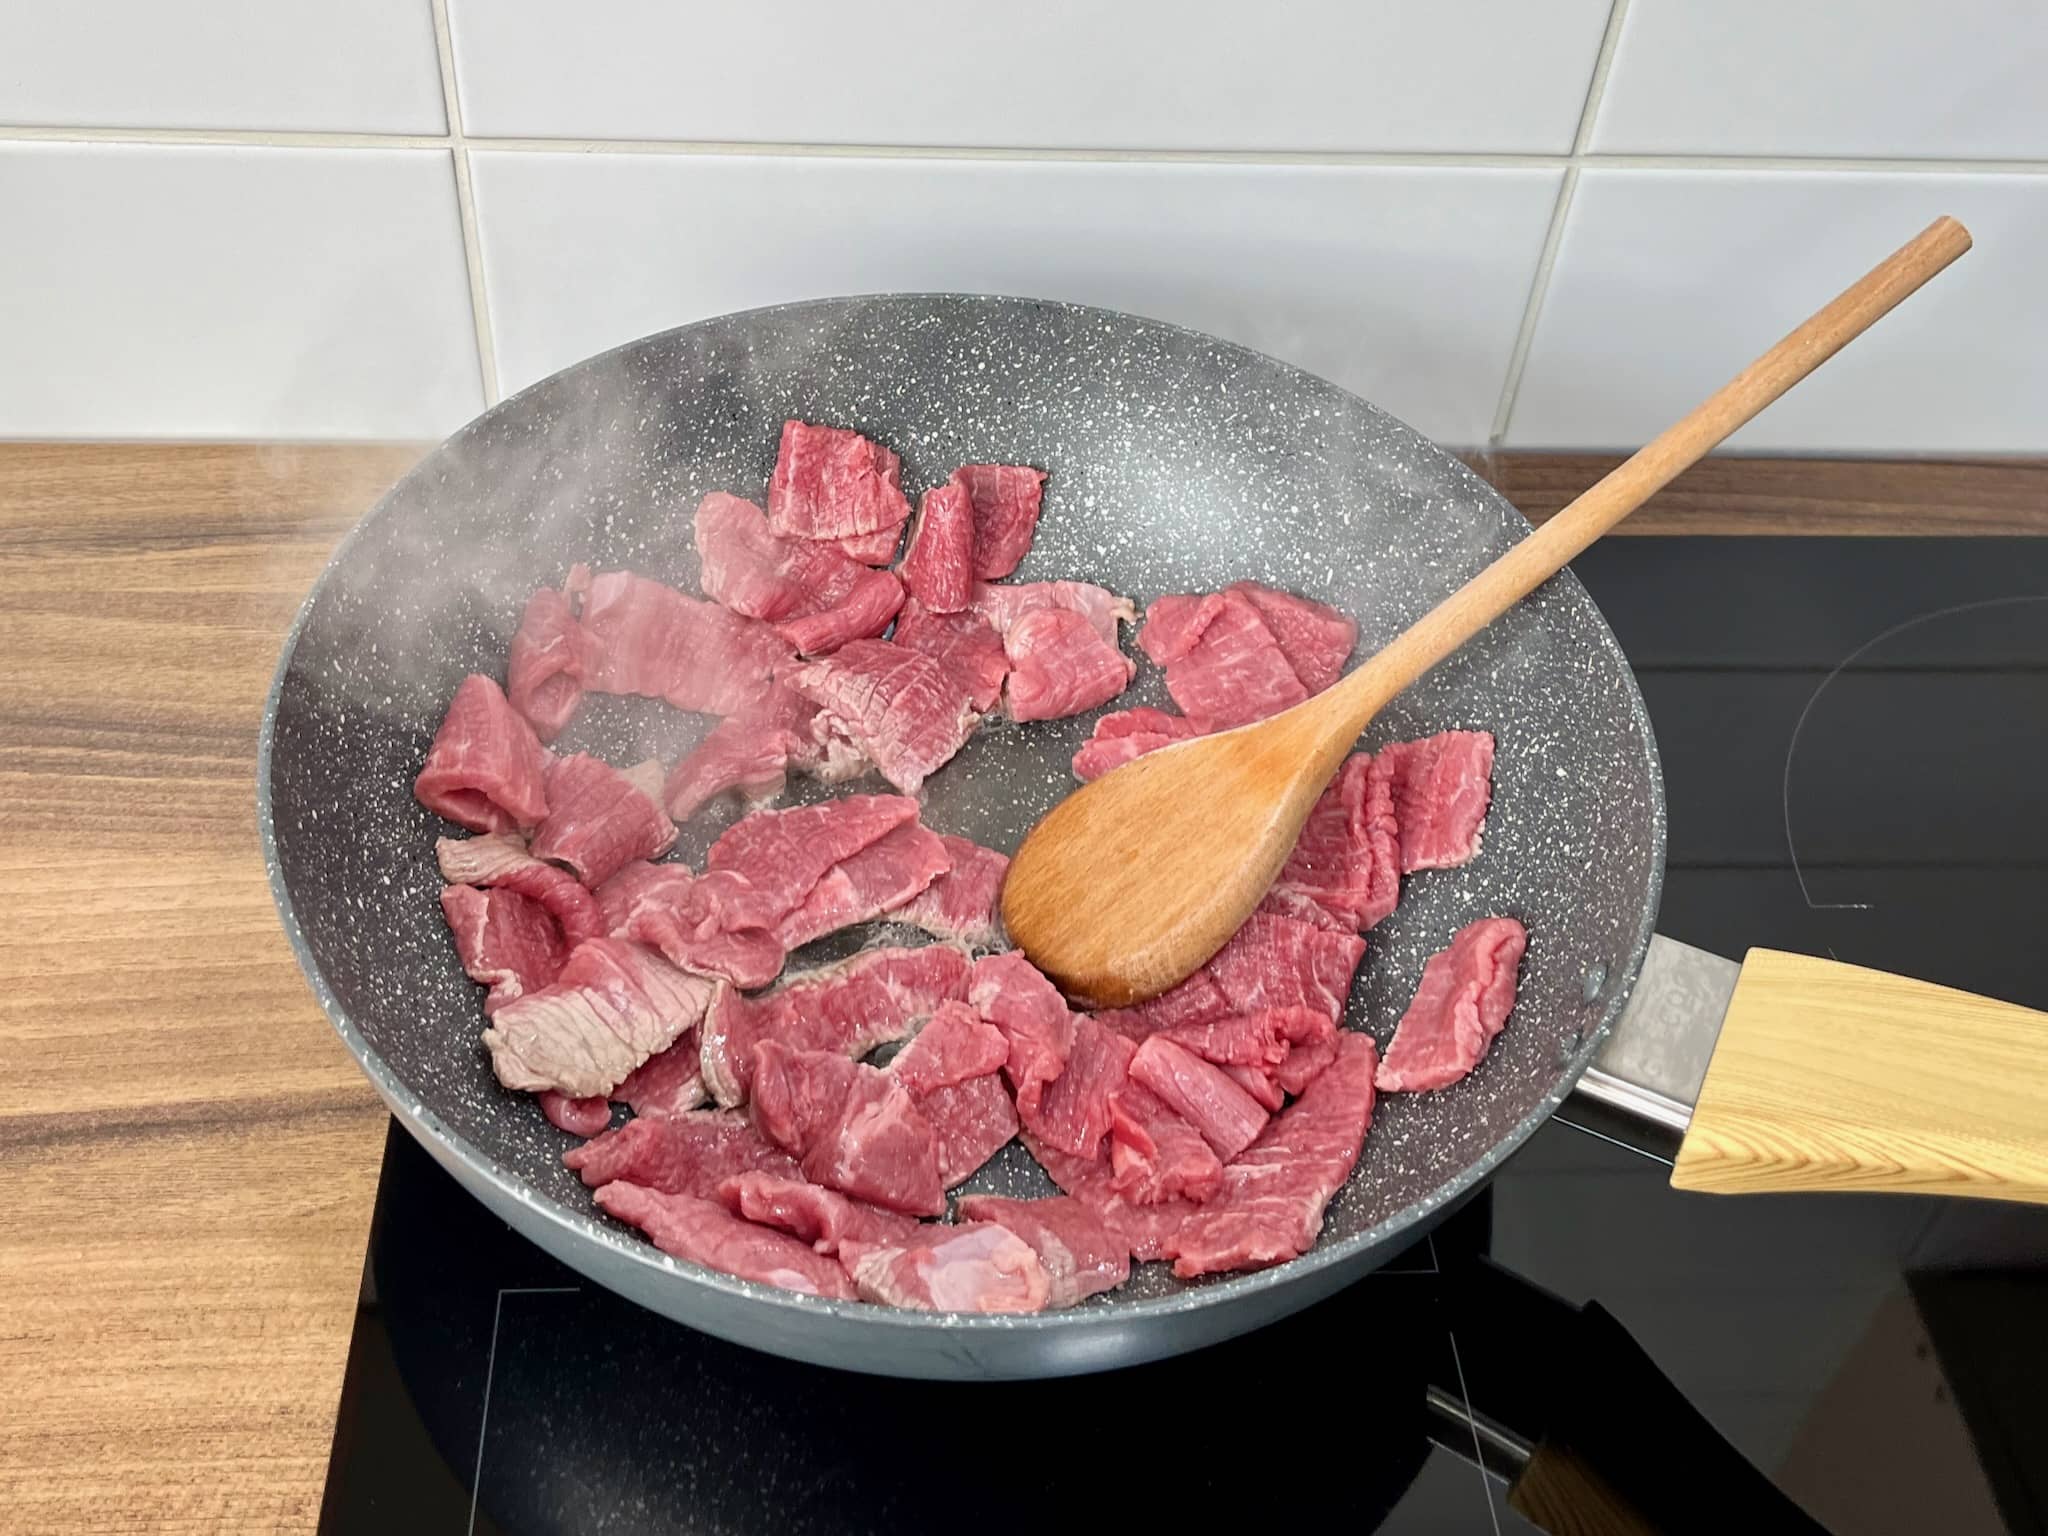 Steak meat slices are cooked in a large skillet